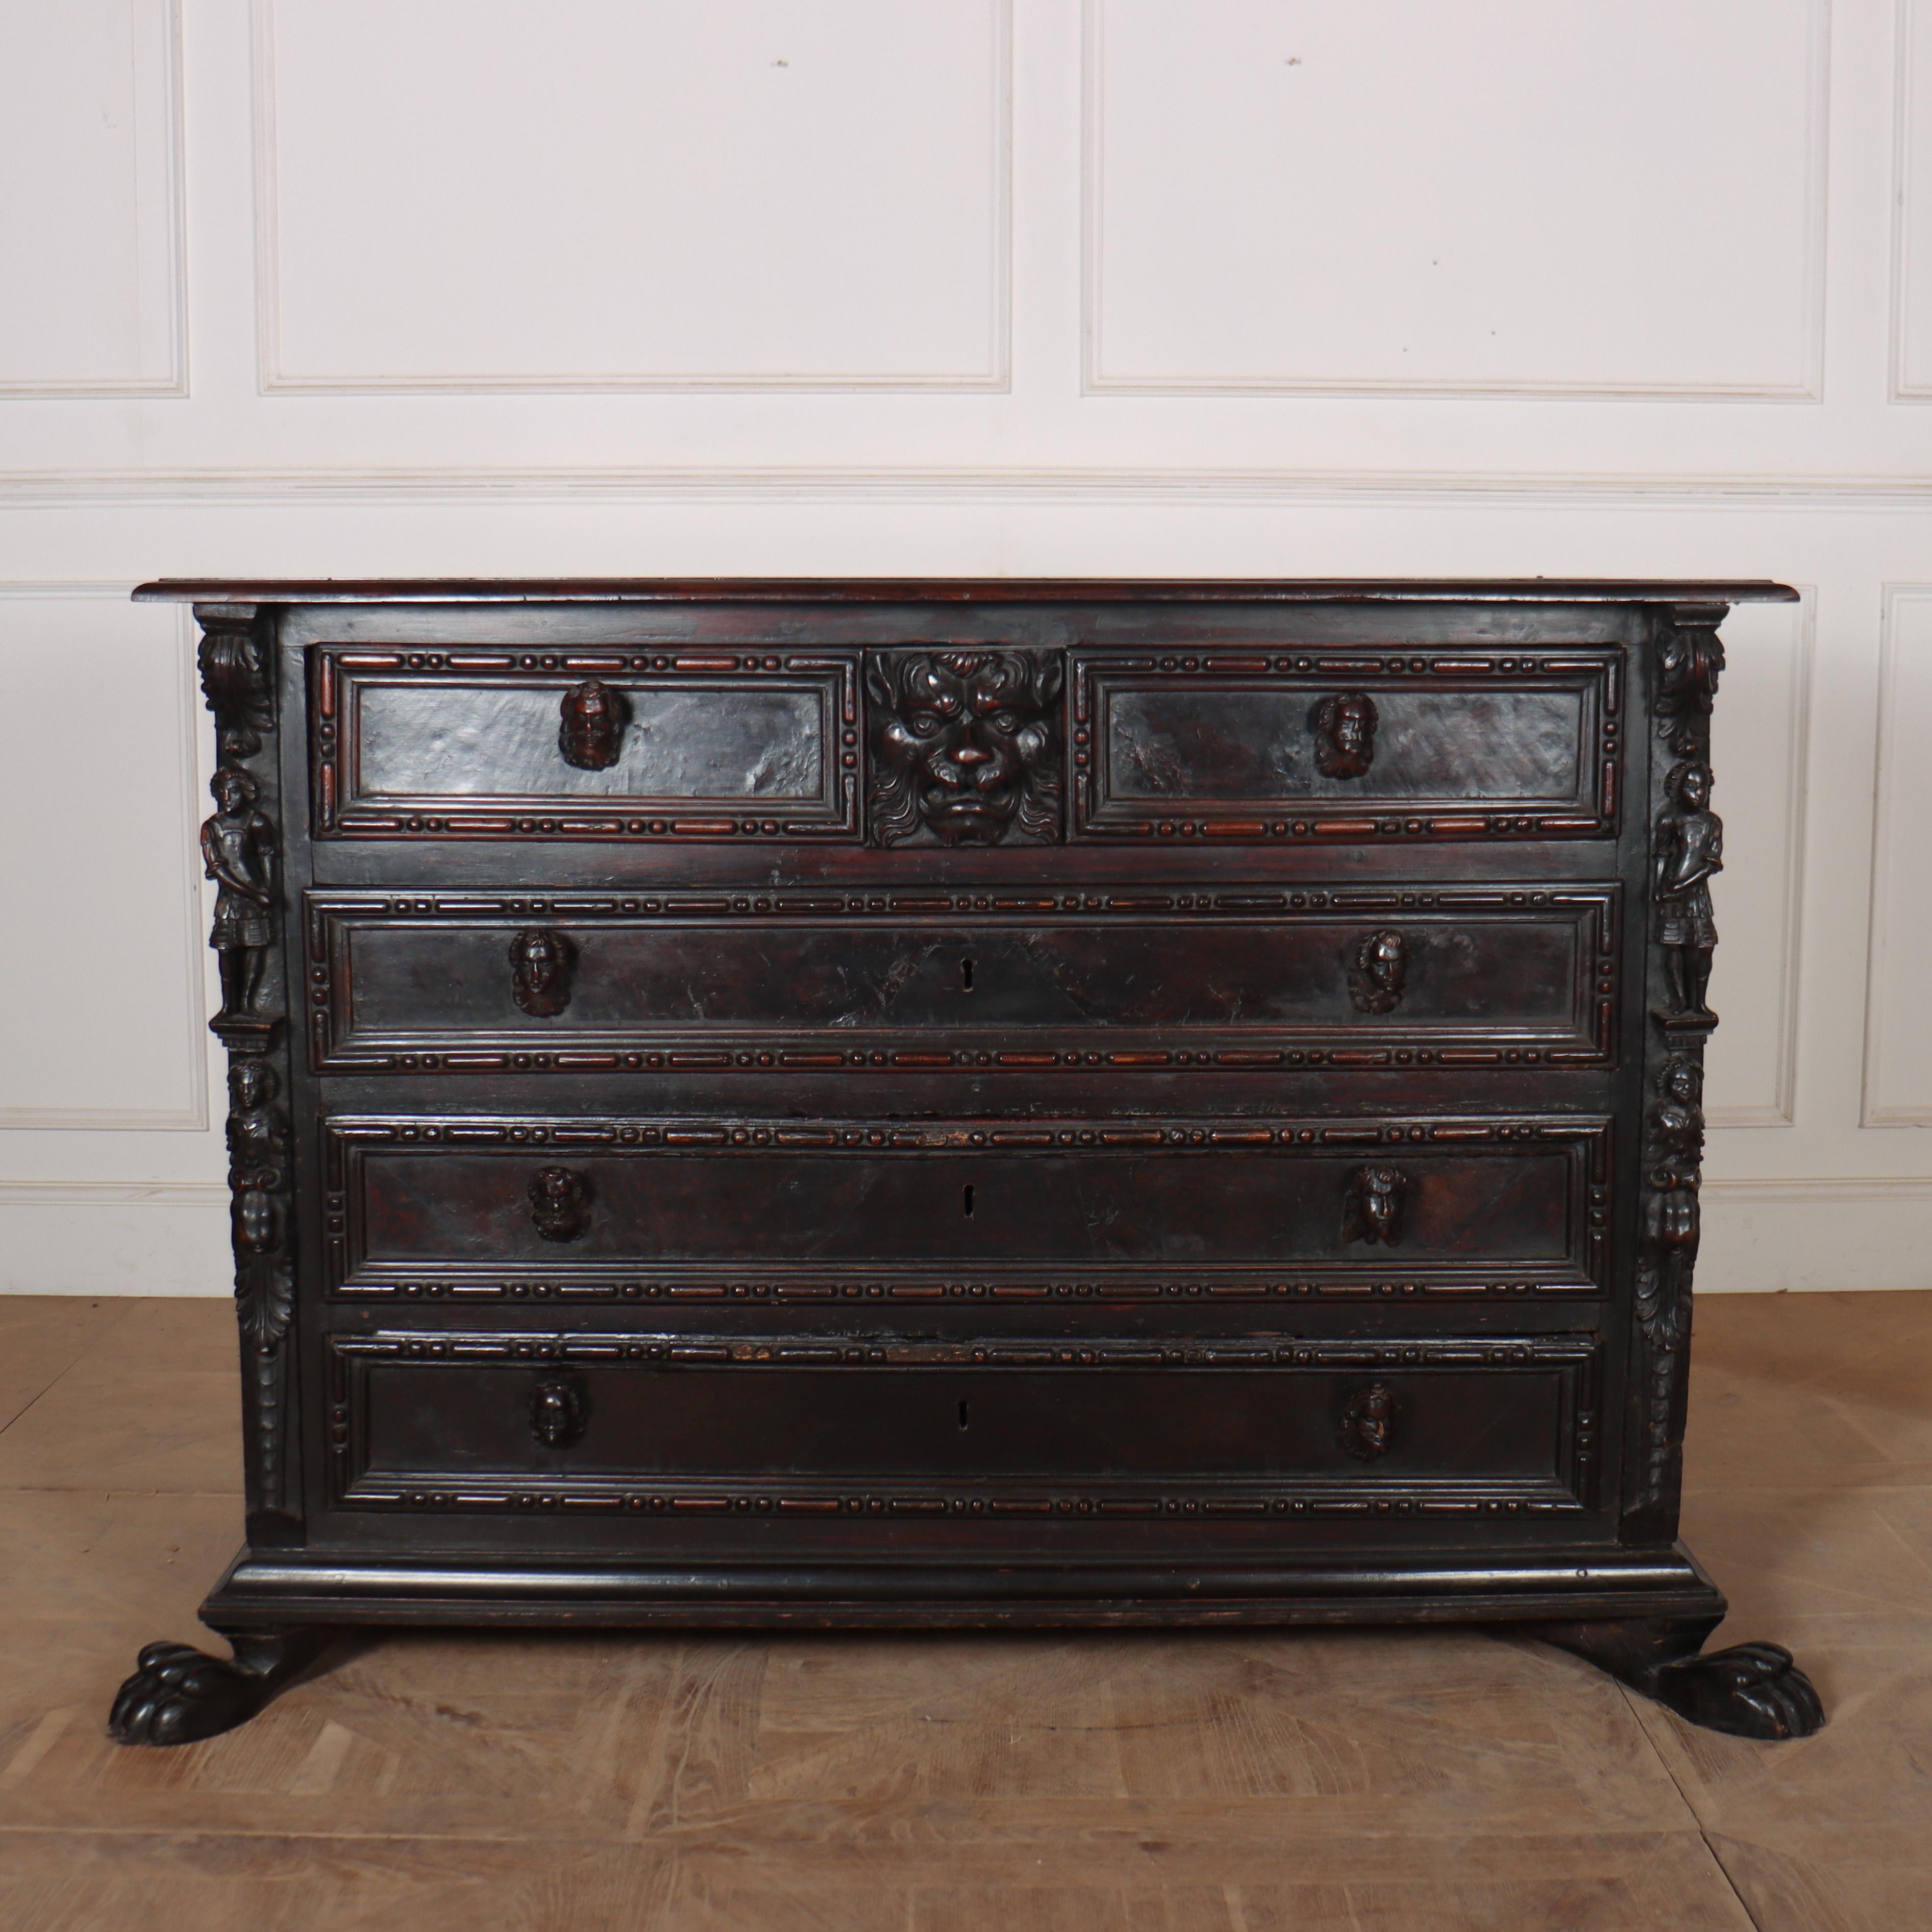 Stunning 18th C Italian carved Walnut commode with carved head handles, carved figures and large paw feet. 1740

Reference: 8337

Dimensions
63 inches (160 cms) Wide
29 inches (74 cms) Deep
42 inches (107 cms) High